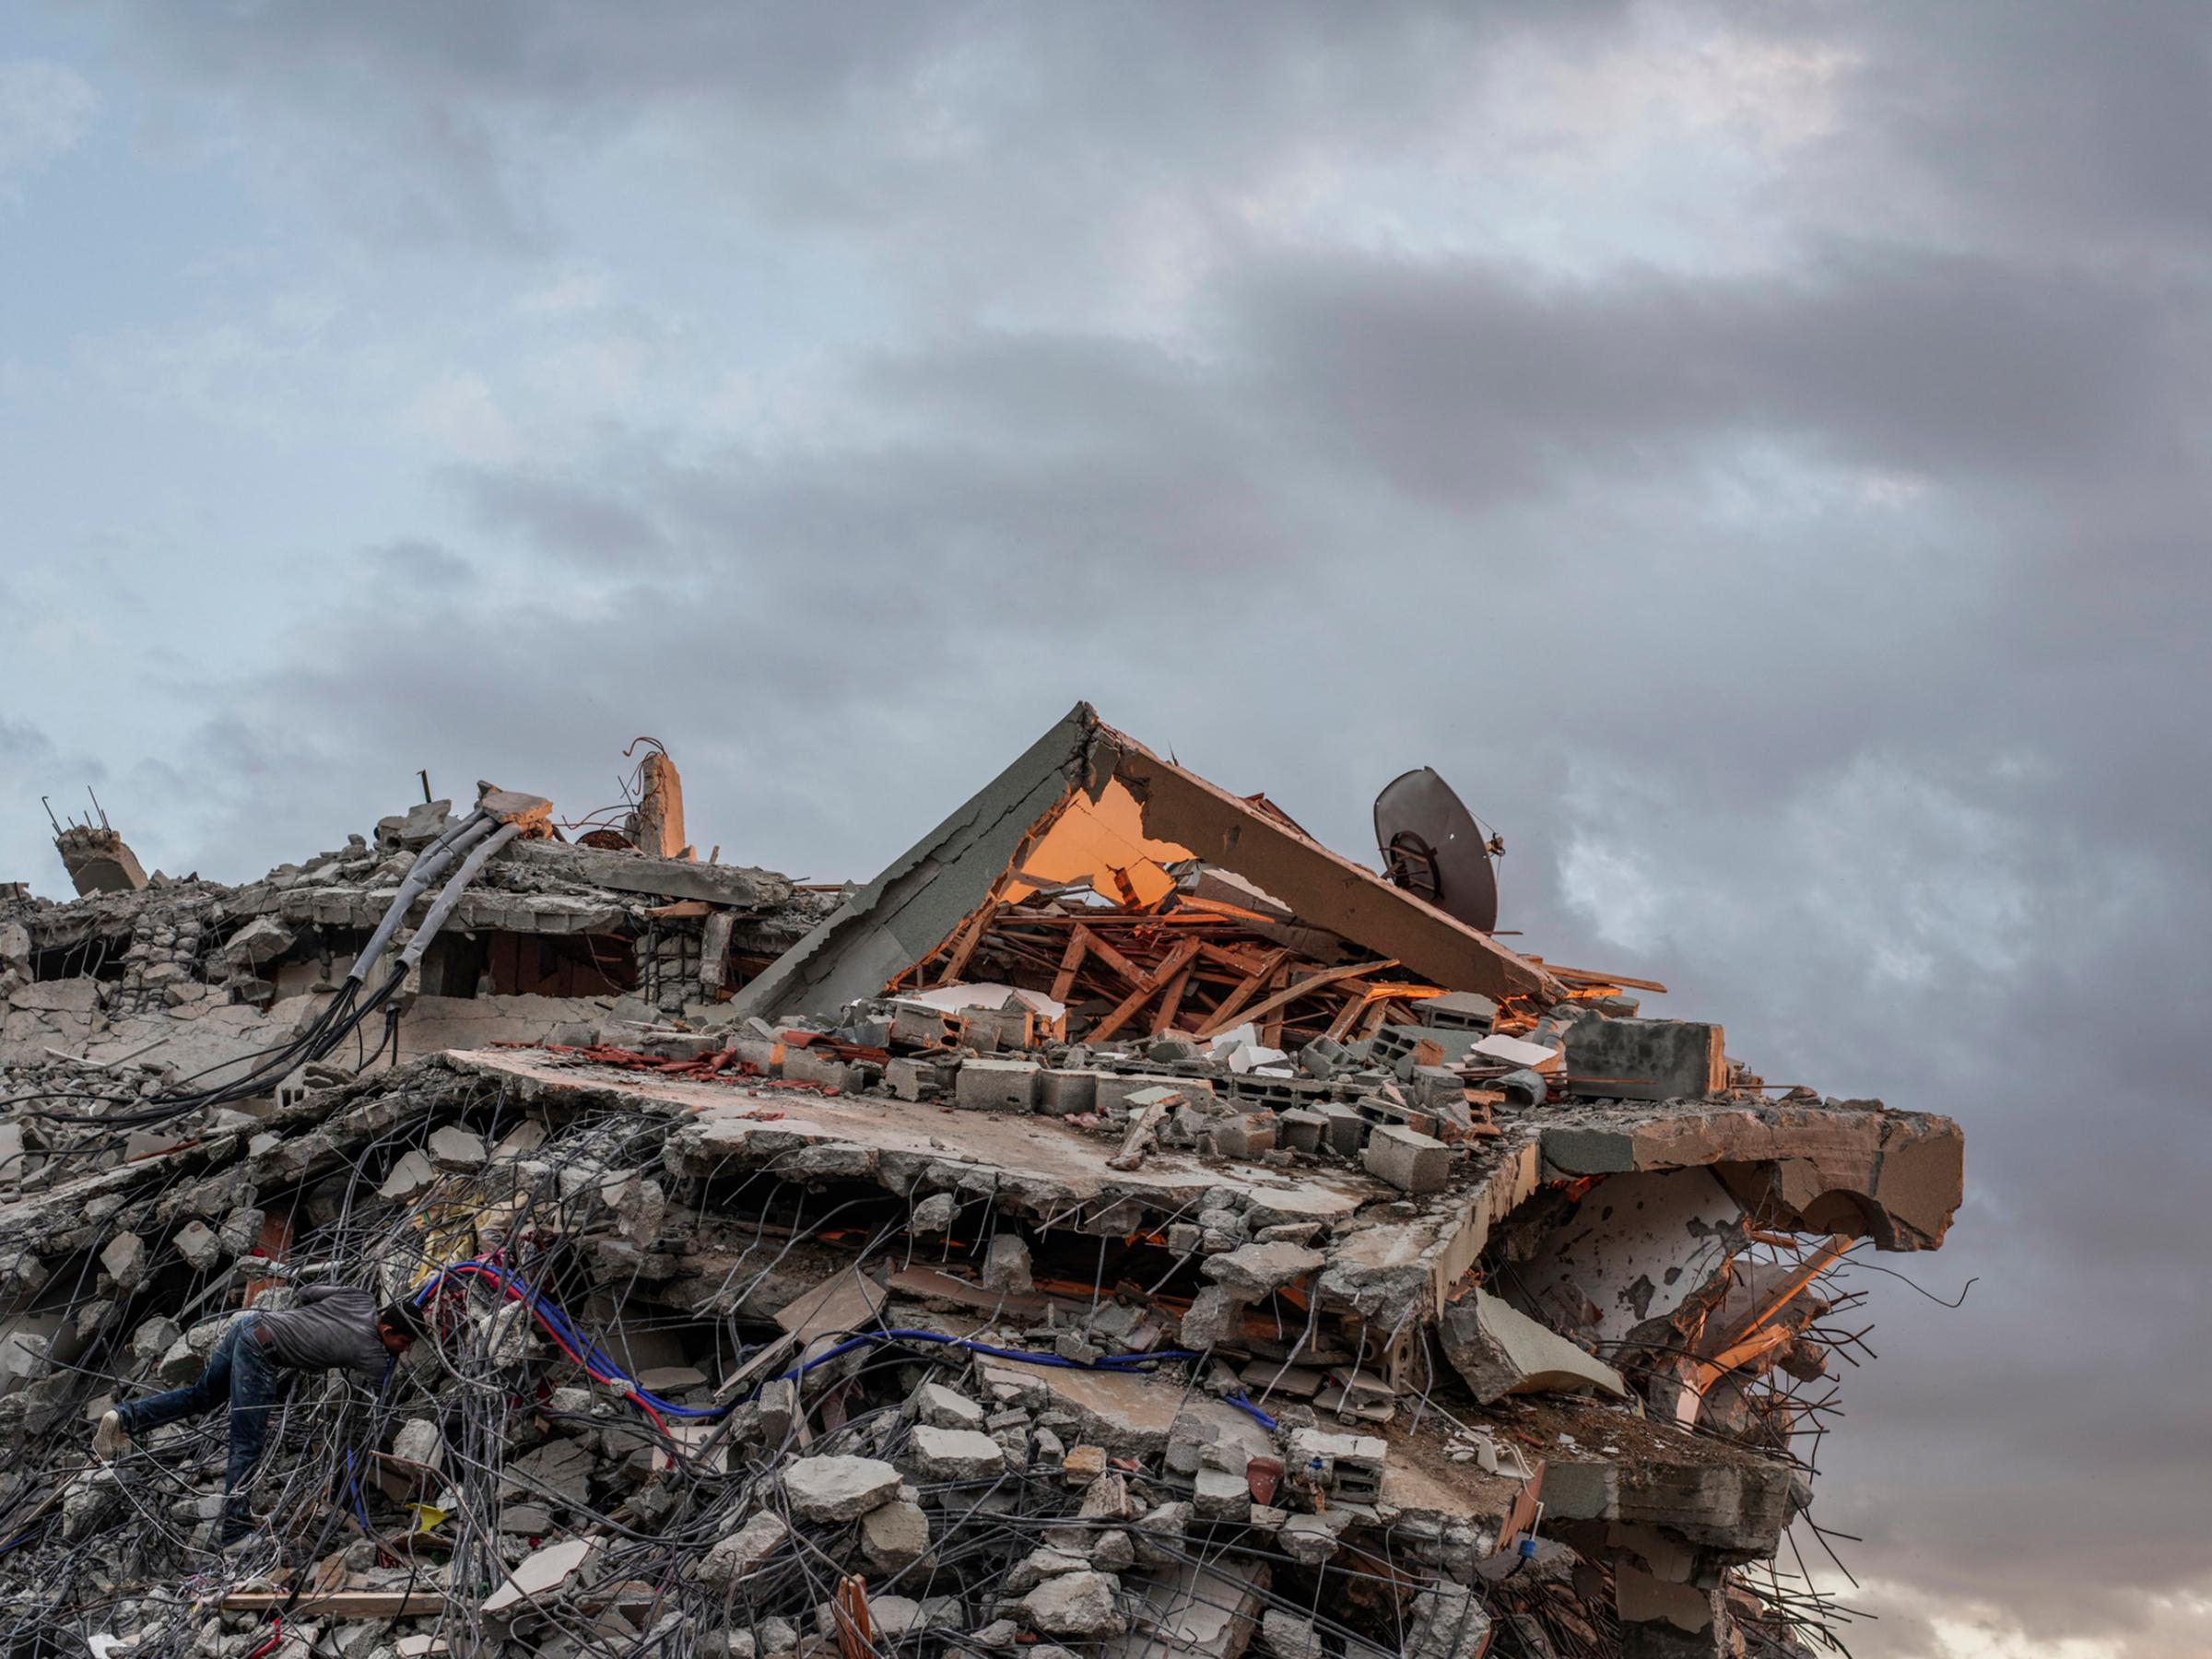 2014.  Gaza.  Palestine. A man salvages scrap from a destroyed building in the Shujai'iya neighborhood.  Operation Protective Edge lasted from 8 July 2014 – 26 August 2014, killing 2,189 Palestinians of which 1,486 are believed to be civilians. 66 Israeli soldiers and 6 civilians were killed.  It's estimated that 4,564 rockets were fired at Israel by Palestinian militants.